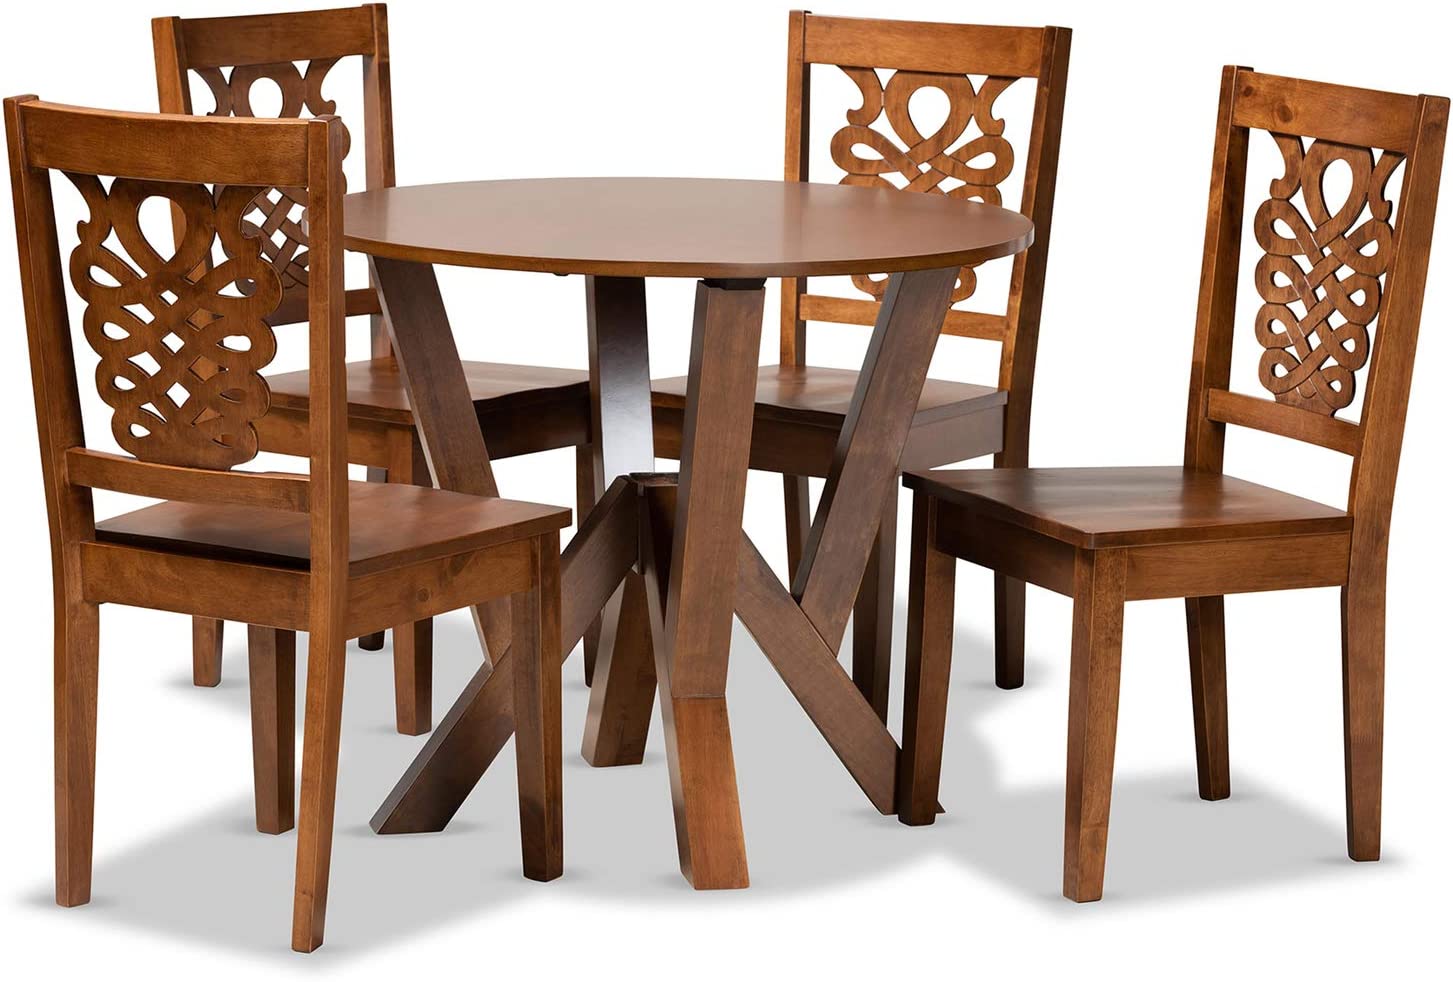 Baxton Studio Valda Modern and Contemporary Transitional Walnut Brown Finished Wood 5-Piece Dining Set